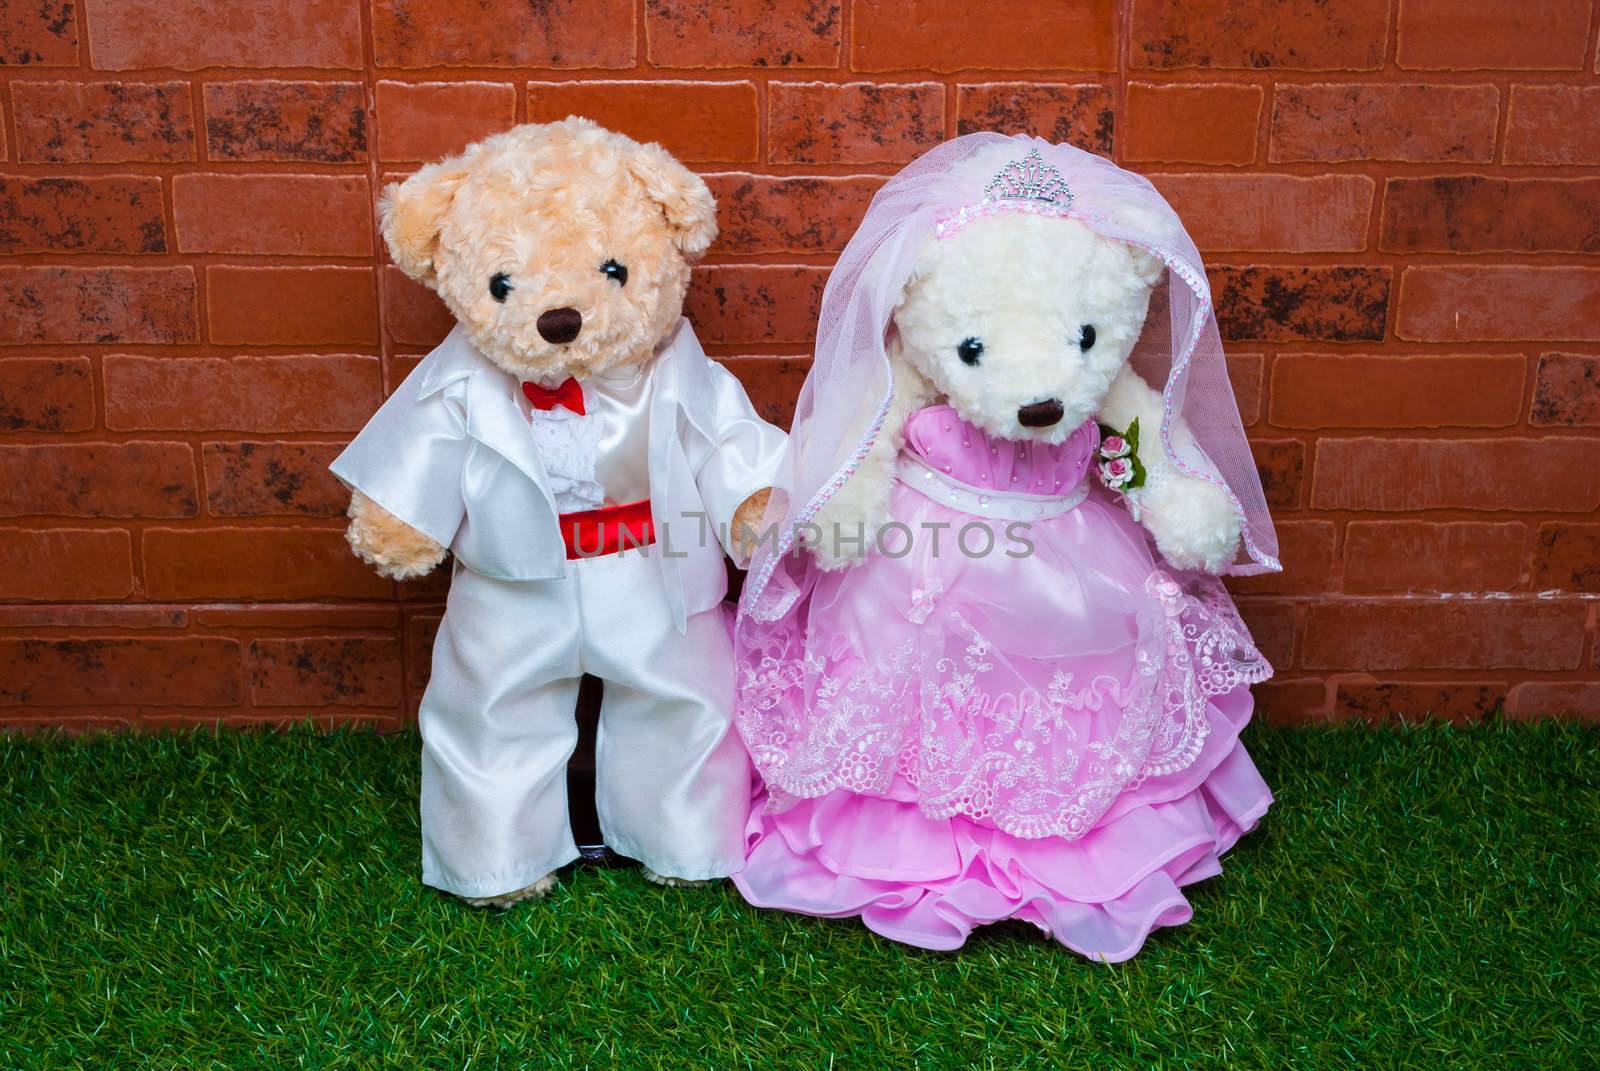 Bridal pair of teddy bear with grass and brick wall.